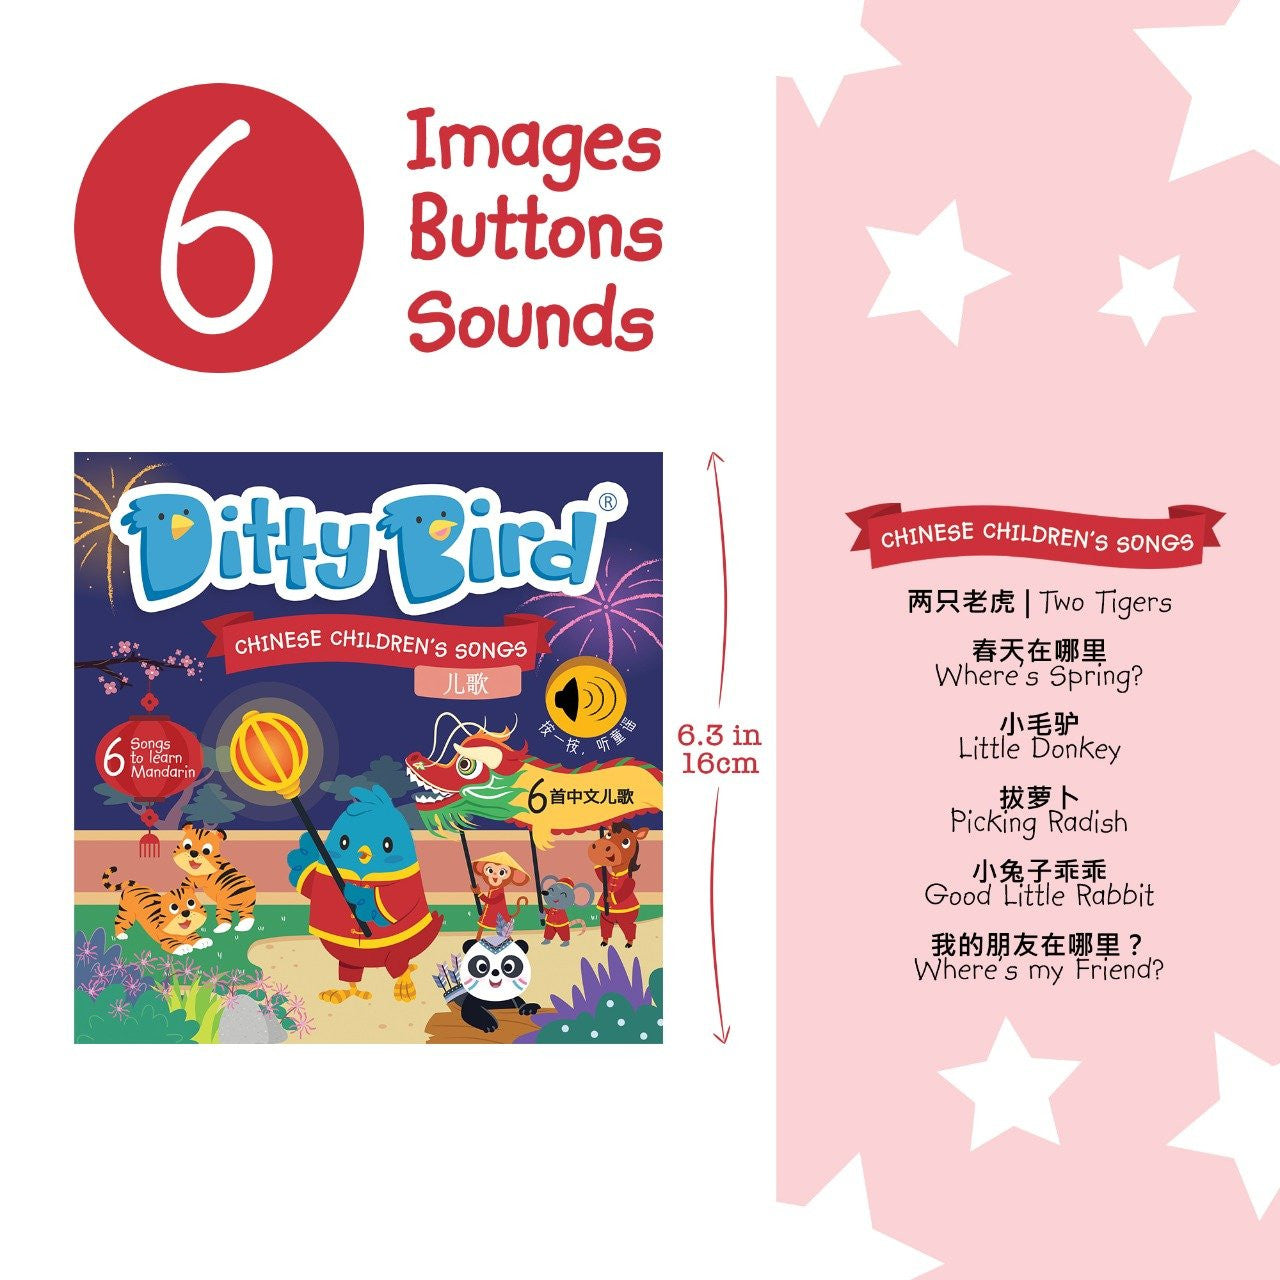 Ditty Bird Chinese Children's Songs Sounds Book [Authentic] - Audio Sound Book for Children Ages 1+ Ready Stocks [B1-2]